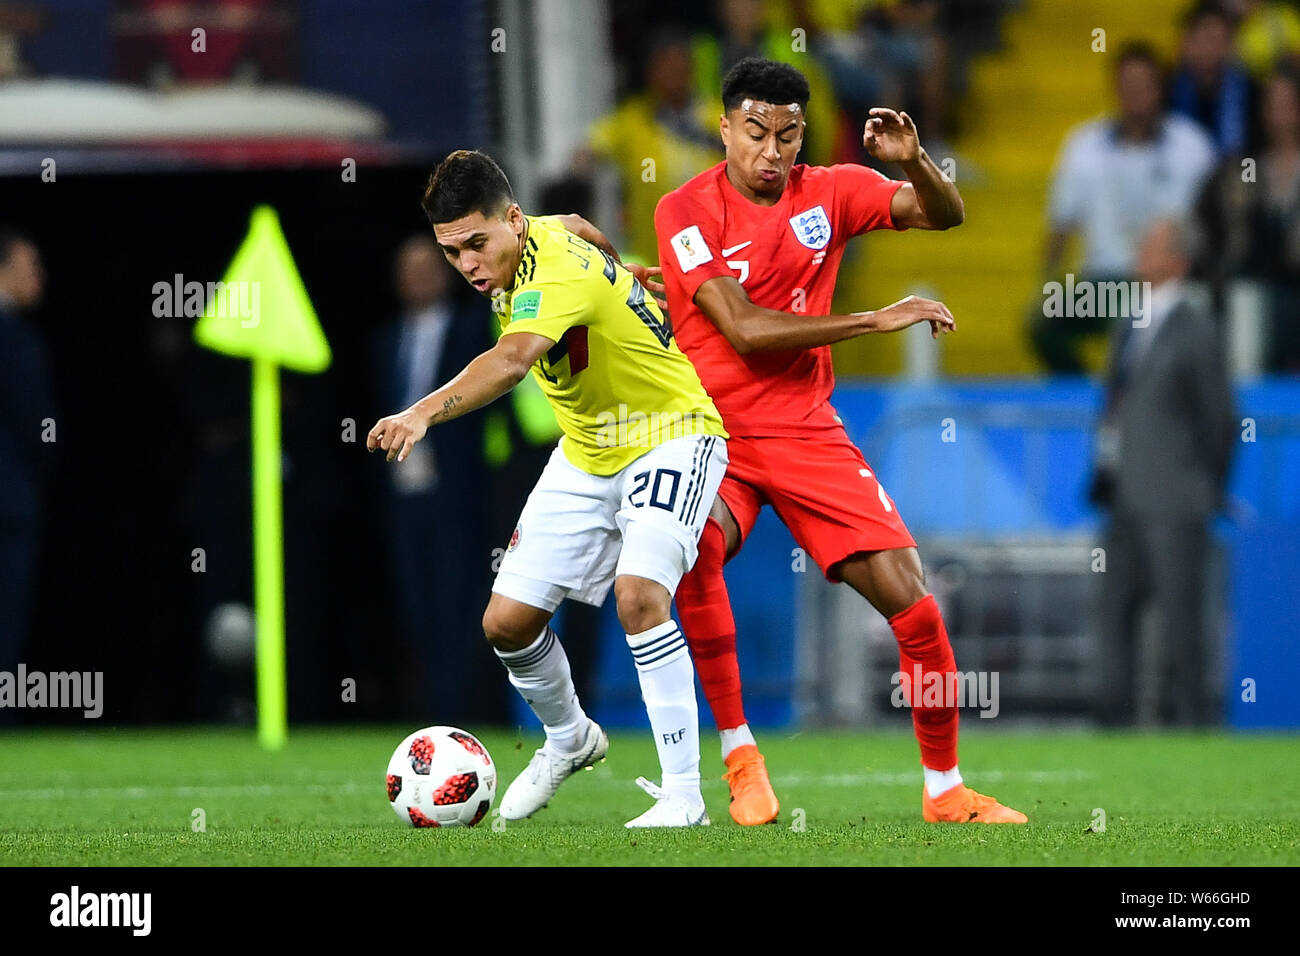 Jesse Lingard of England, right, challeges Juan Fernando Quintero of Columbia in their Round of 16 match during the 2018 FIFA World Cup in Moscow, Rus Stock Photo